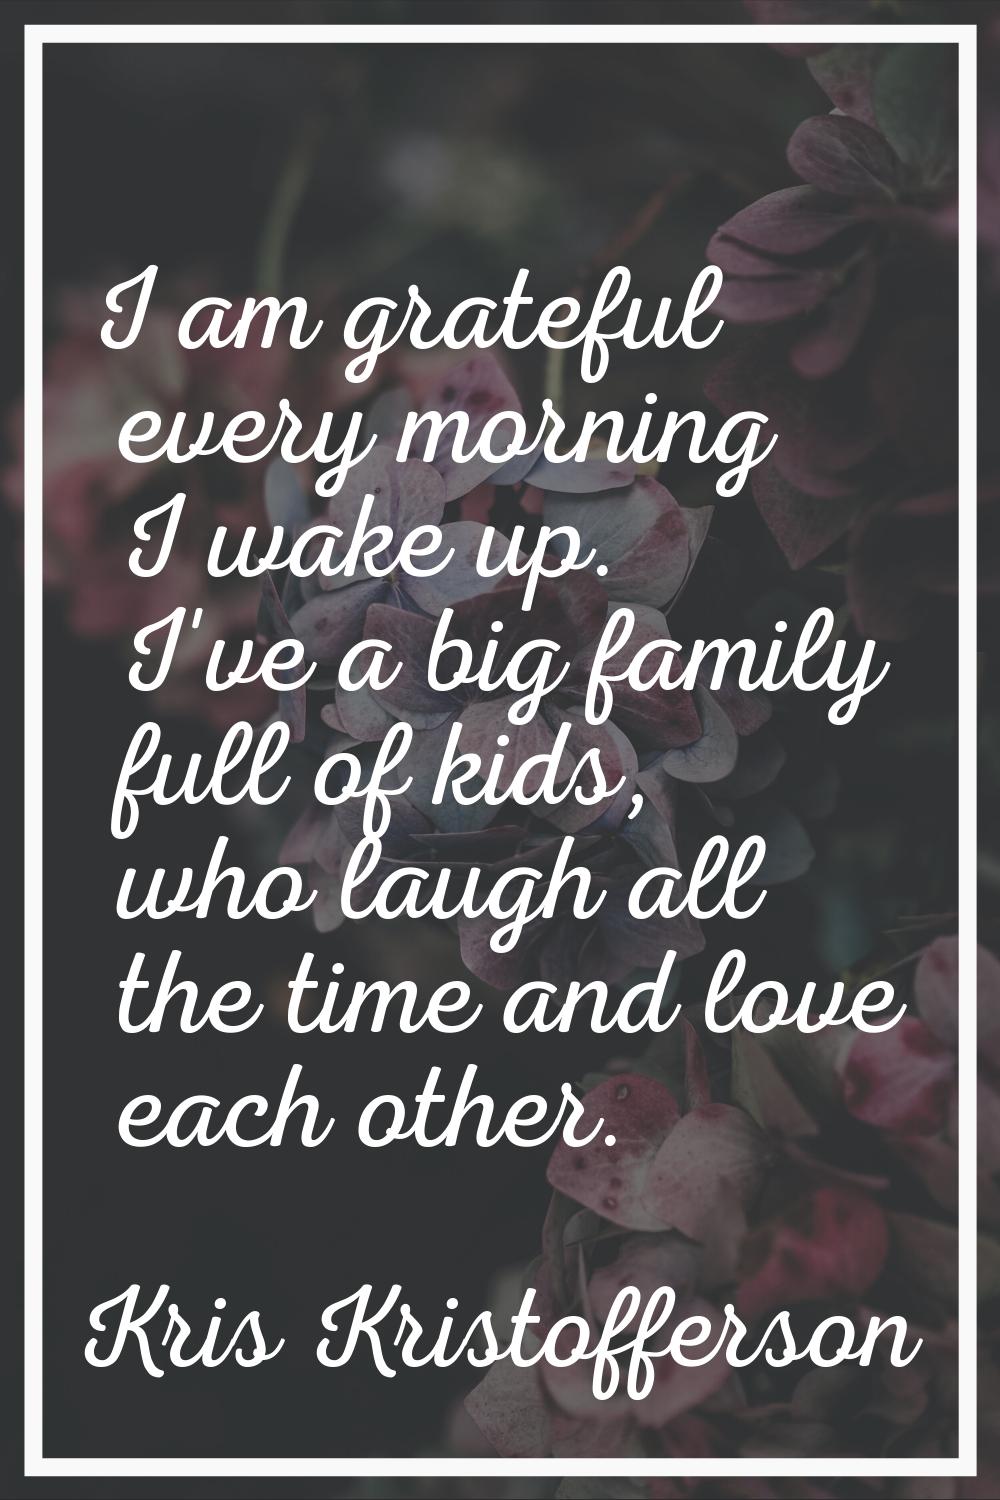 I am grateful every morning I wake up. I've a big family full of kids, who laugh all the time and l